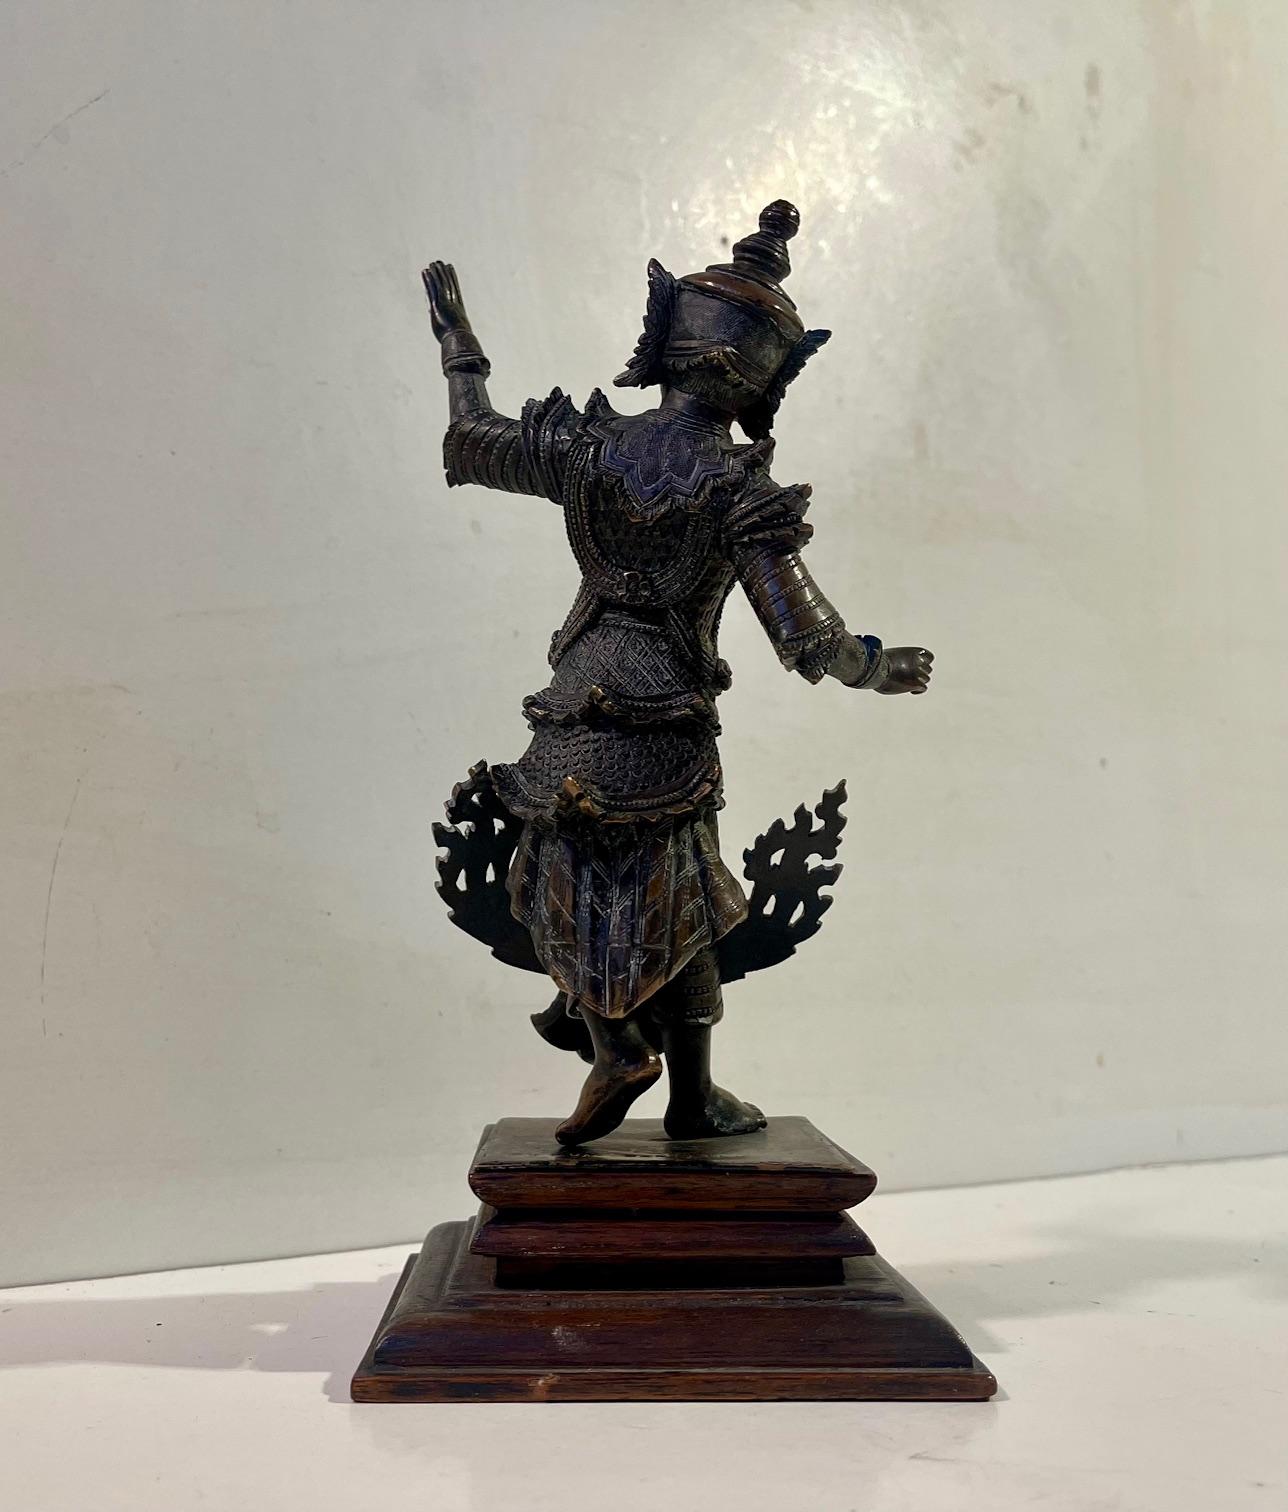 An exceptionally well-cast figure of an elegant male Burmese court dancer in traditional dress. The figure is mounted on its original wooden stand. It stands balanced on one foot and with both arms in elegant motion. The base is stamped Mandalay and